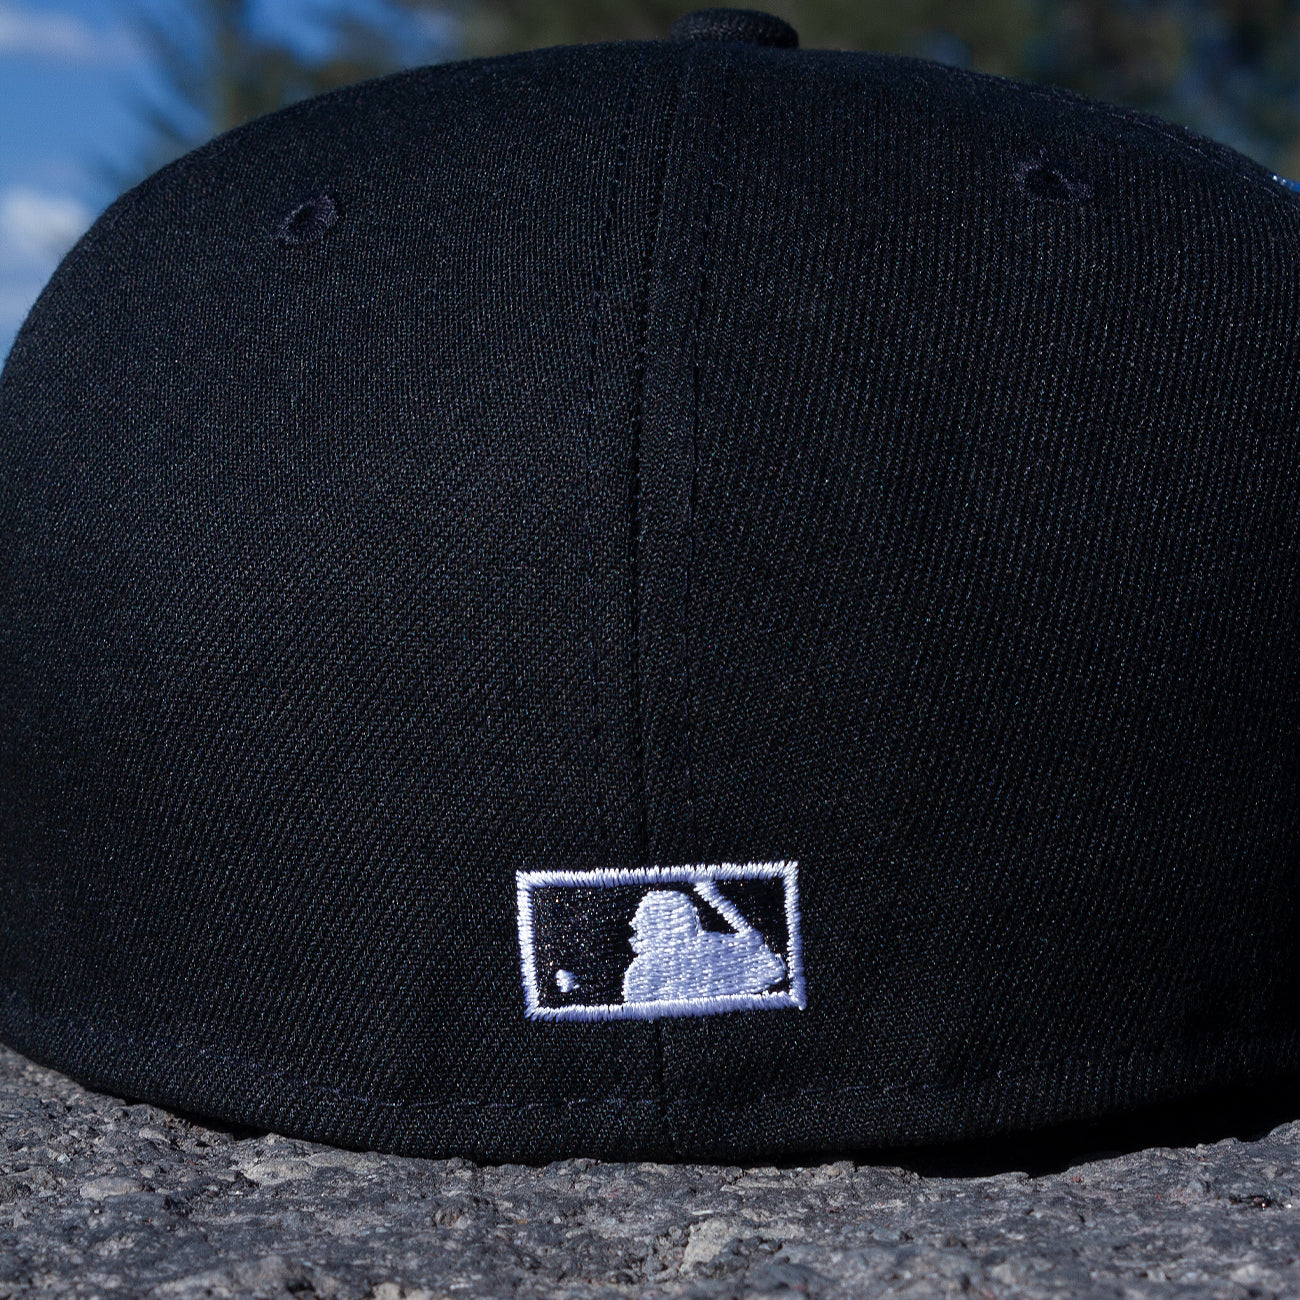 New Era 59Fifty MLB Basic Fitted Cap - Los Angeles Dodgers/Grey - New Star